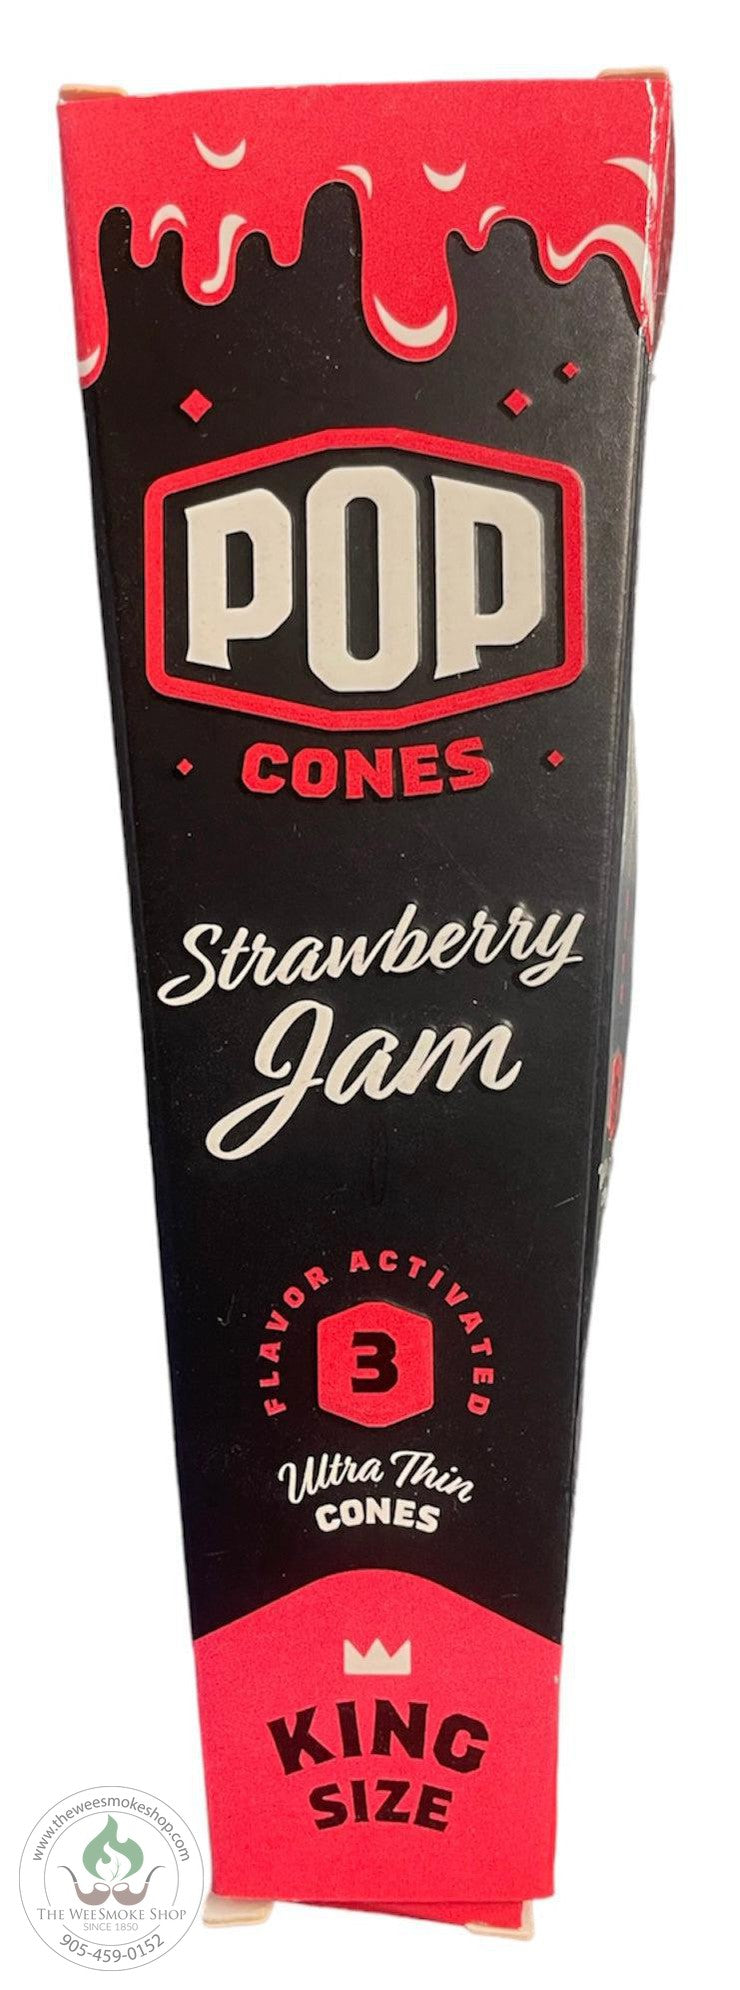 king size strawberry jam pop cones - The Wee Smoke Shop